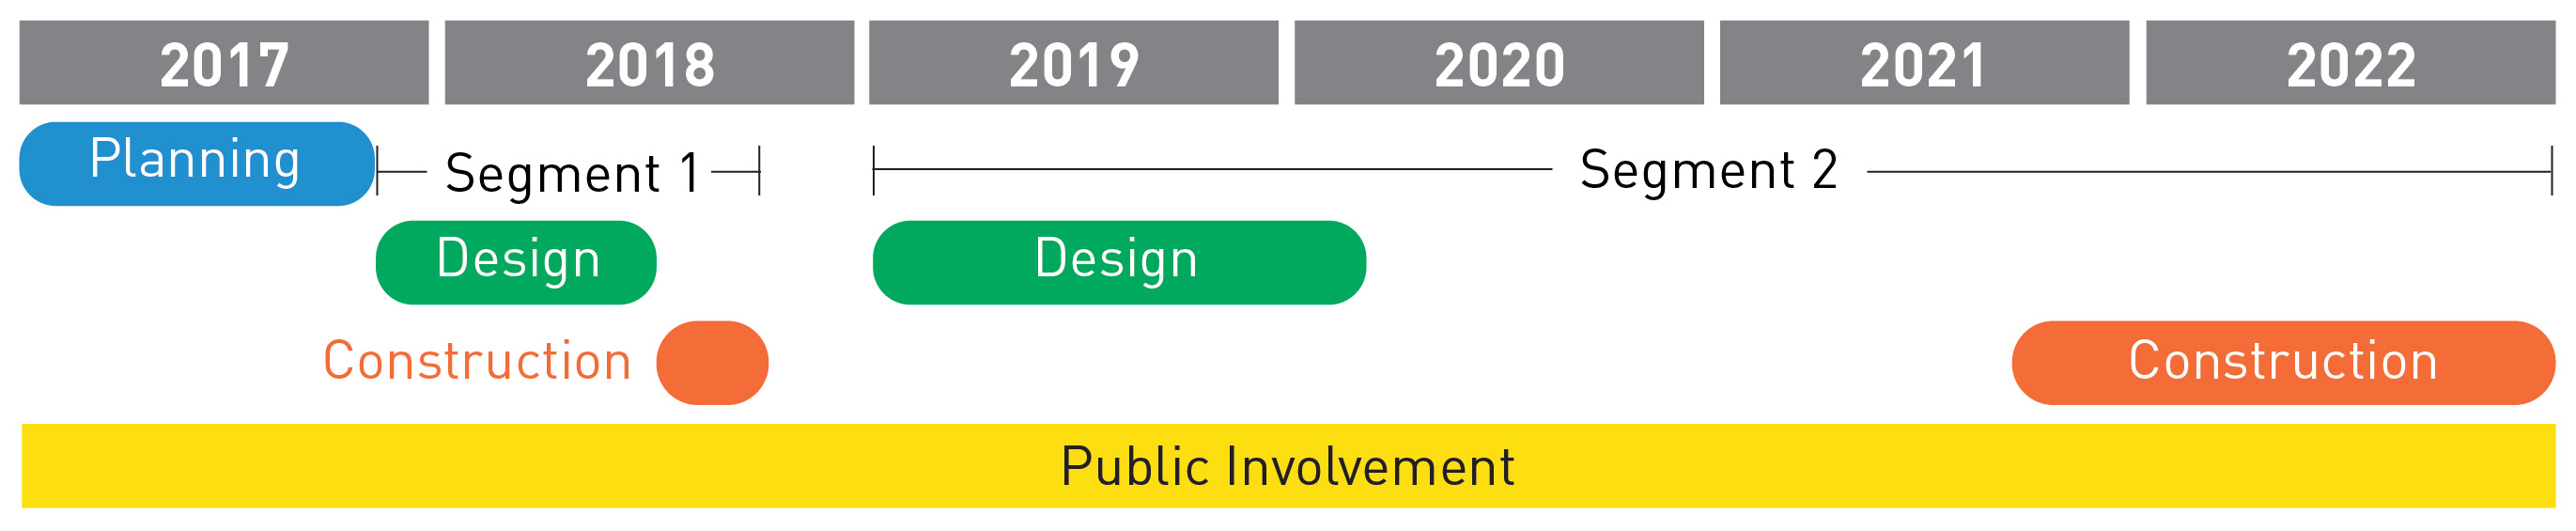 Graphic showing project schedule: planning in 2017, design in 2018, construction of segment 1 in fall 2018 and construction of segment 2 in 2021.